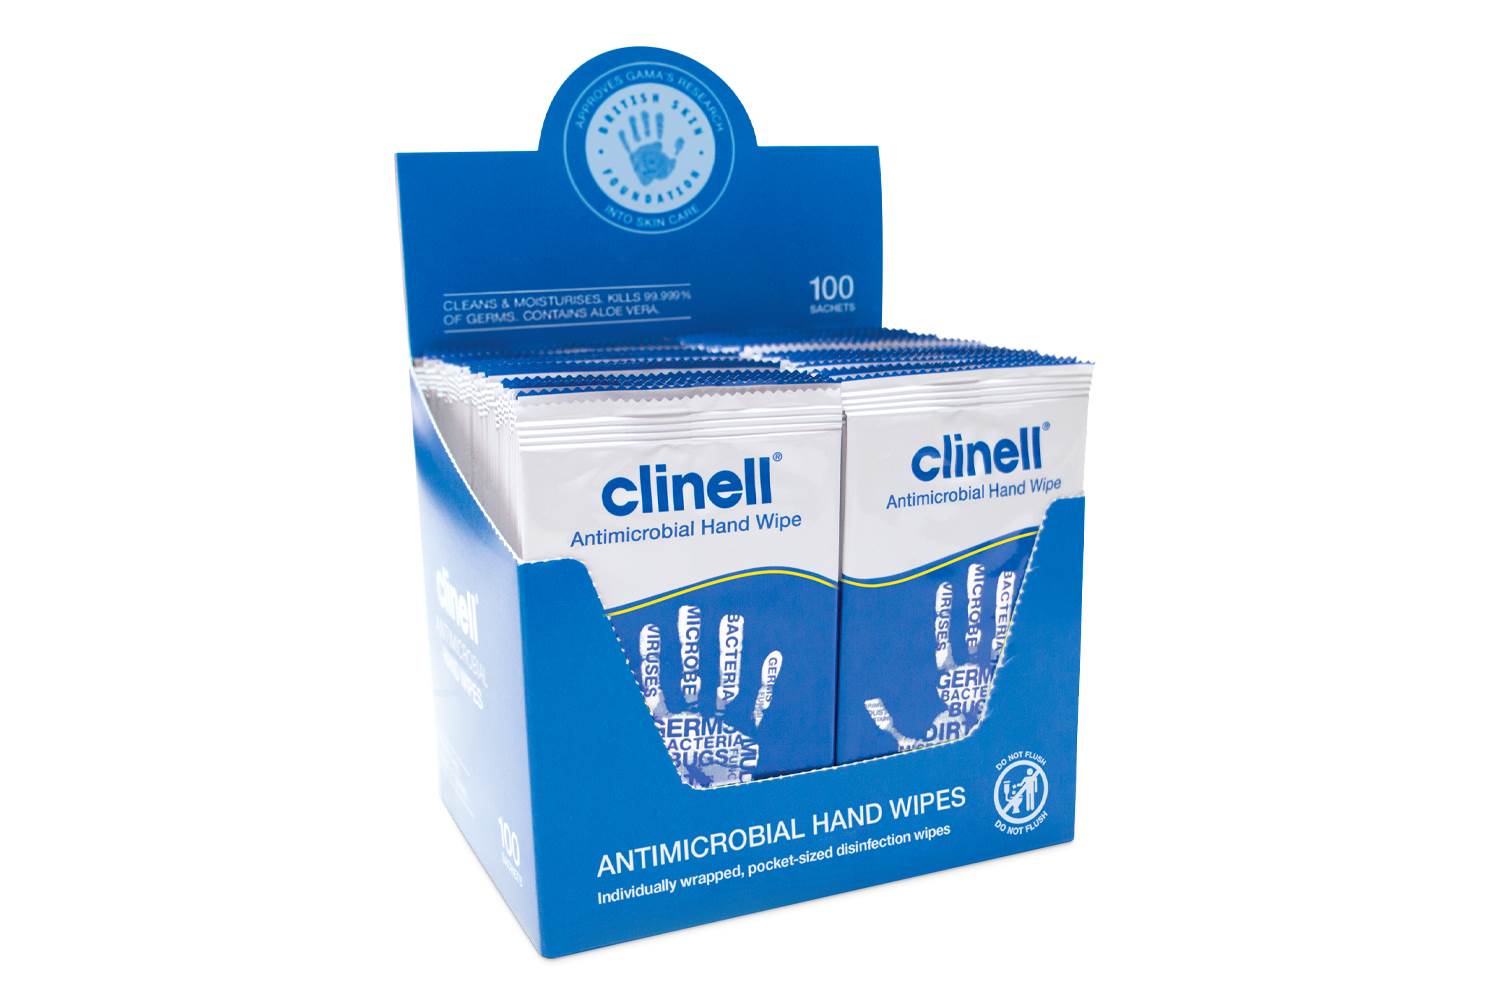 Clinell Antibacterial Hand Wipes (100) Individually Wrapped